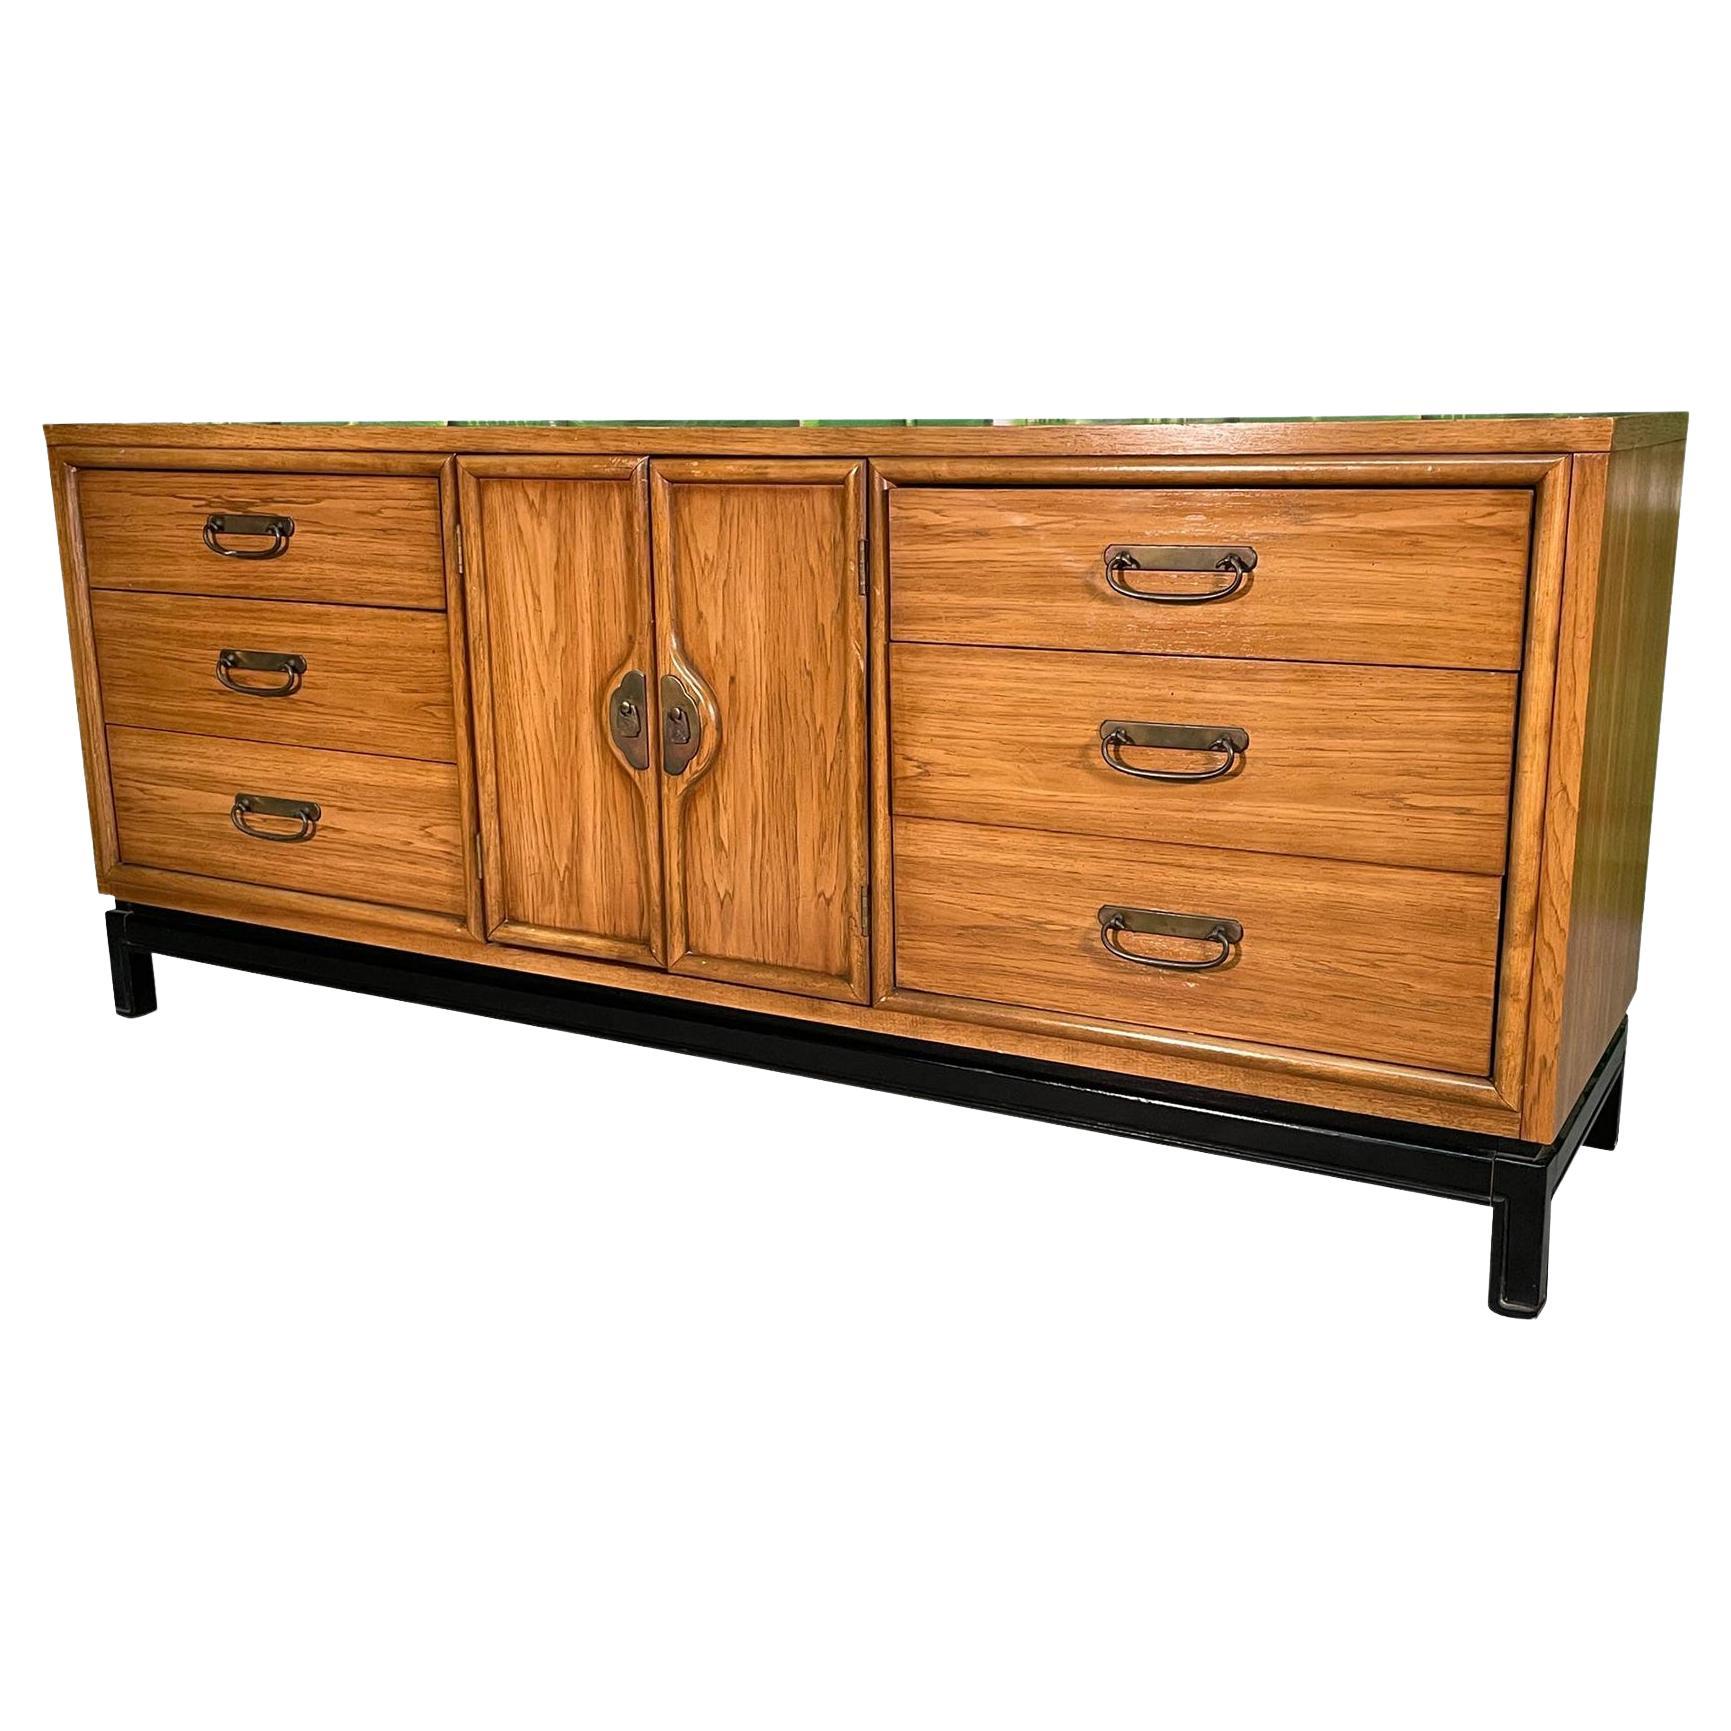 Midcentury Two Toned Legged Dresser or Sideboard